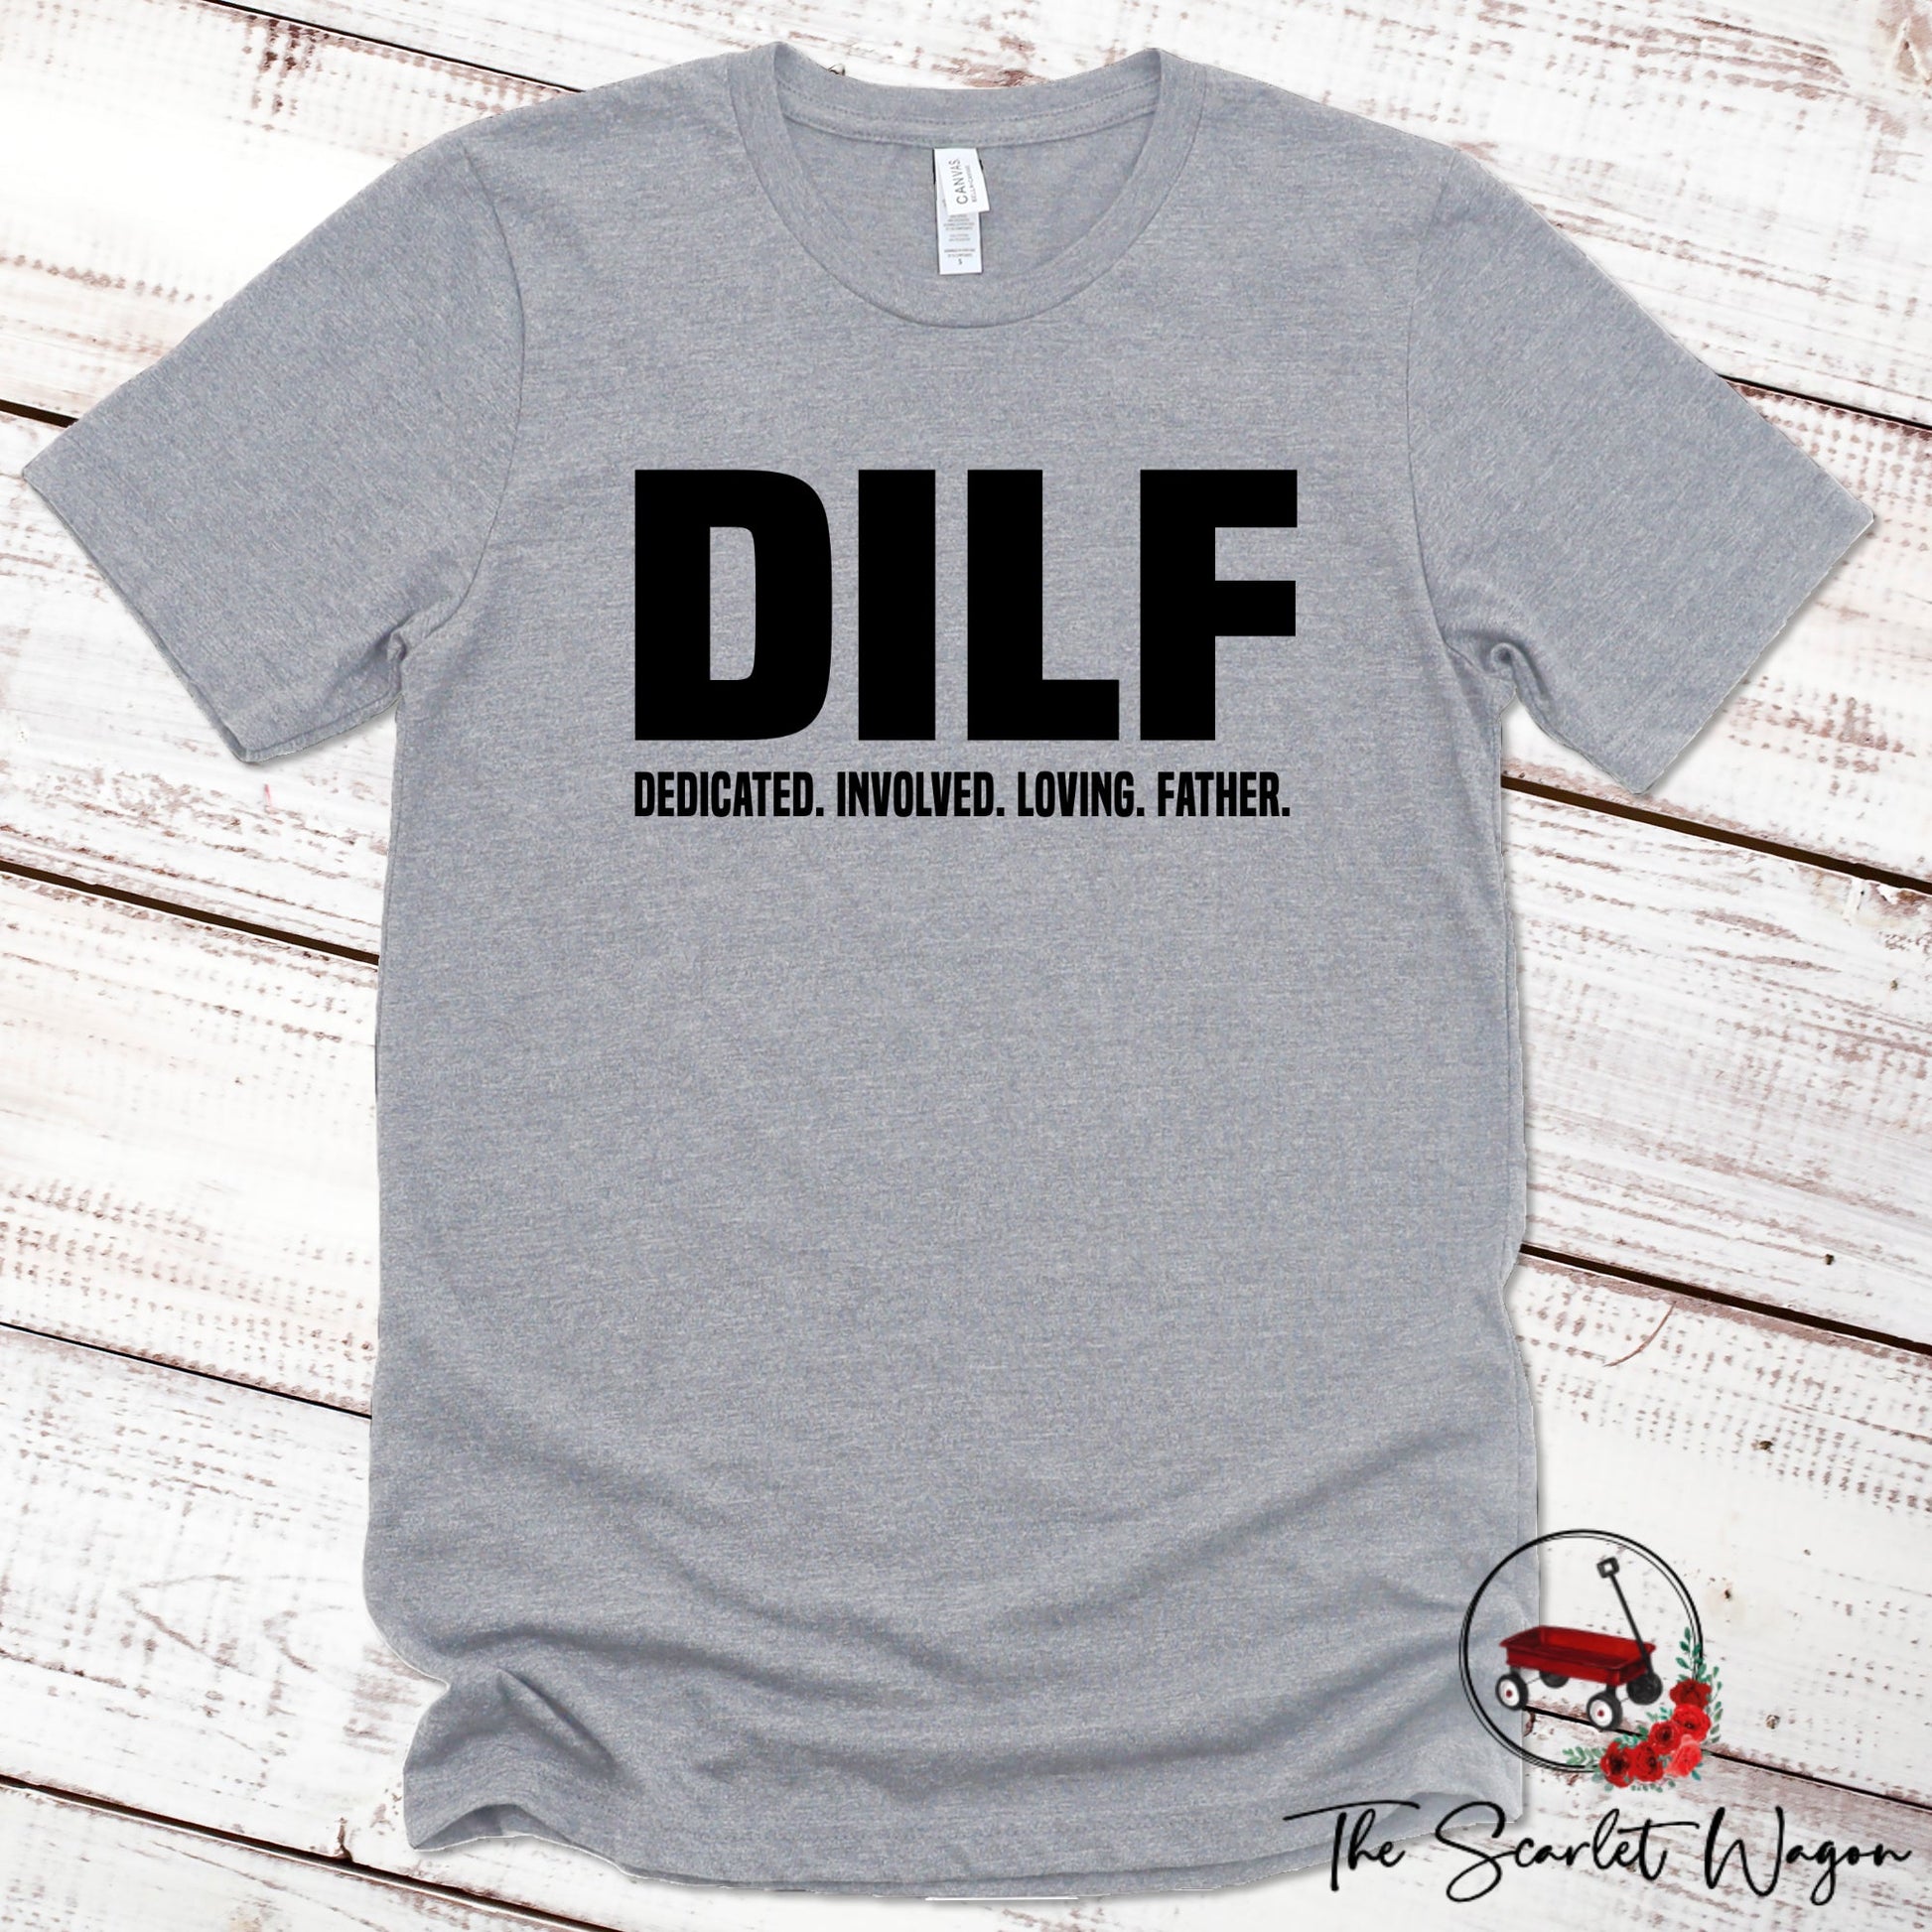 DILF - Dedicated Involved Loving Father Premium Tee Scarlet Wagon Athletic Heather XS 